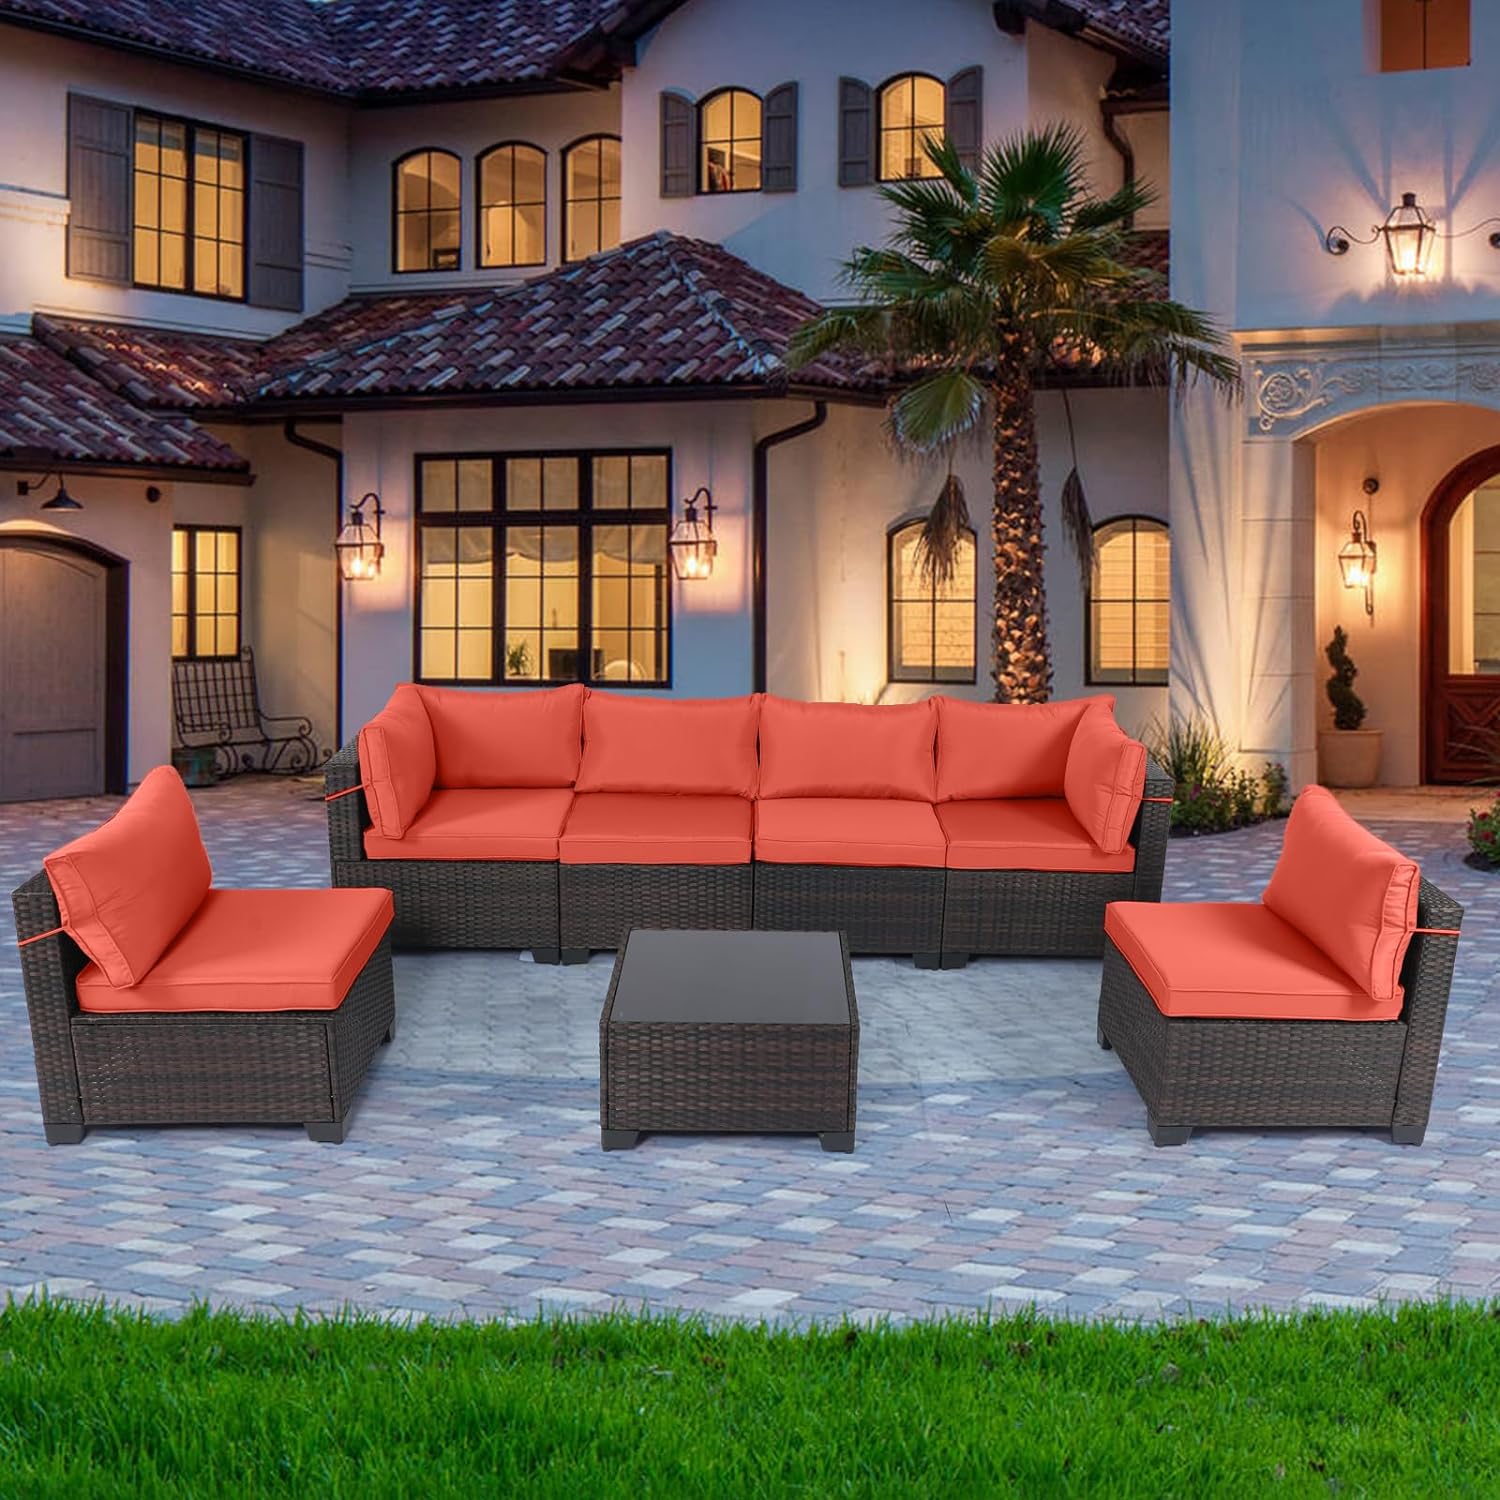 Outdoor Patio Furniture Sets: 7-Piece Rattan Conversation Sectional Set with Wicker Sofa & Tea Table